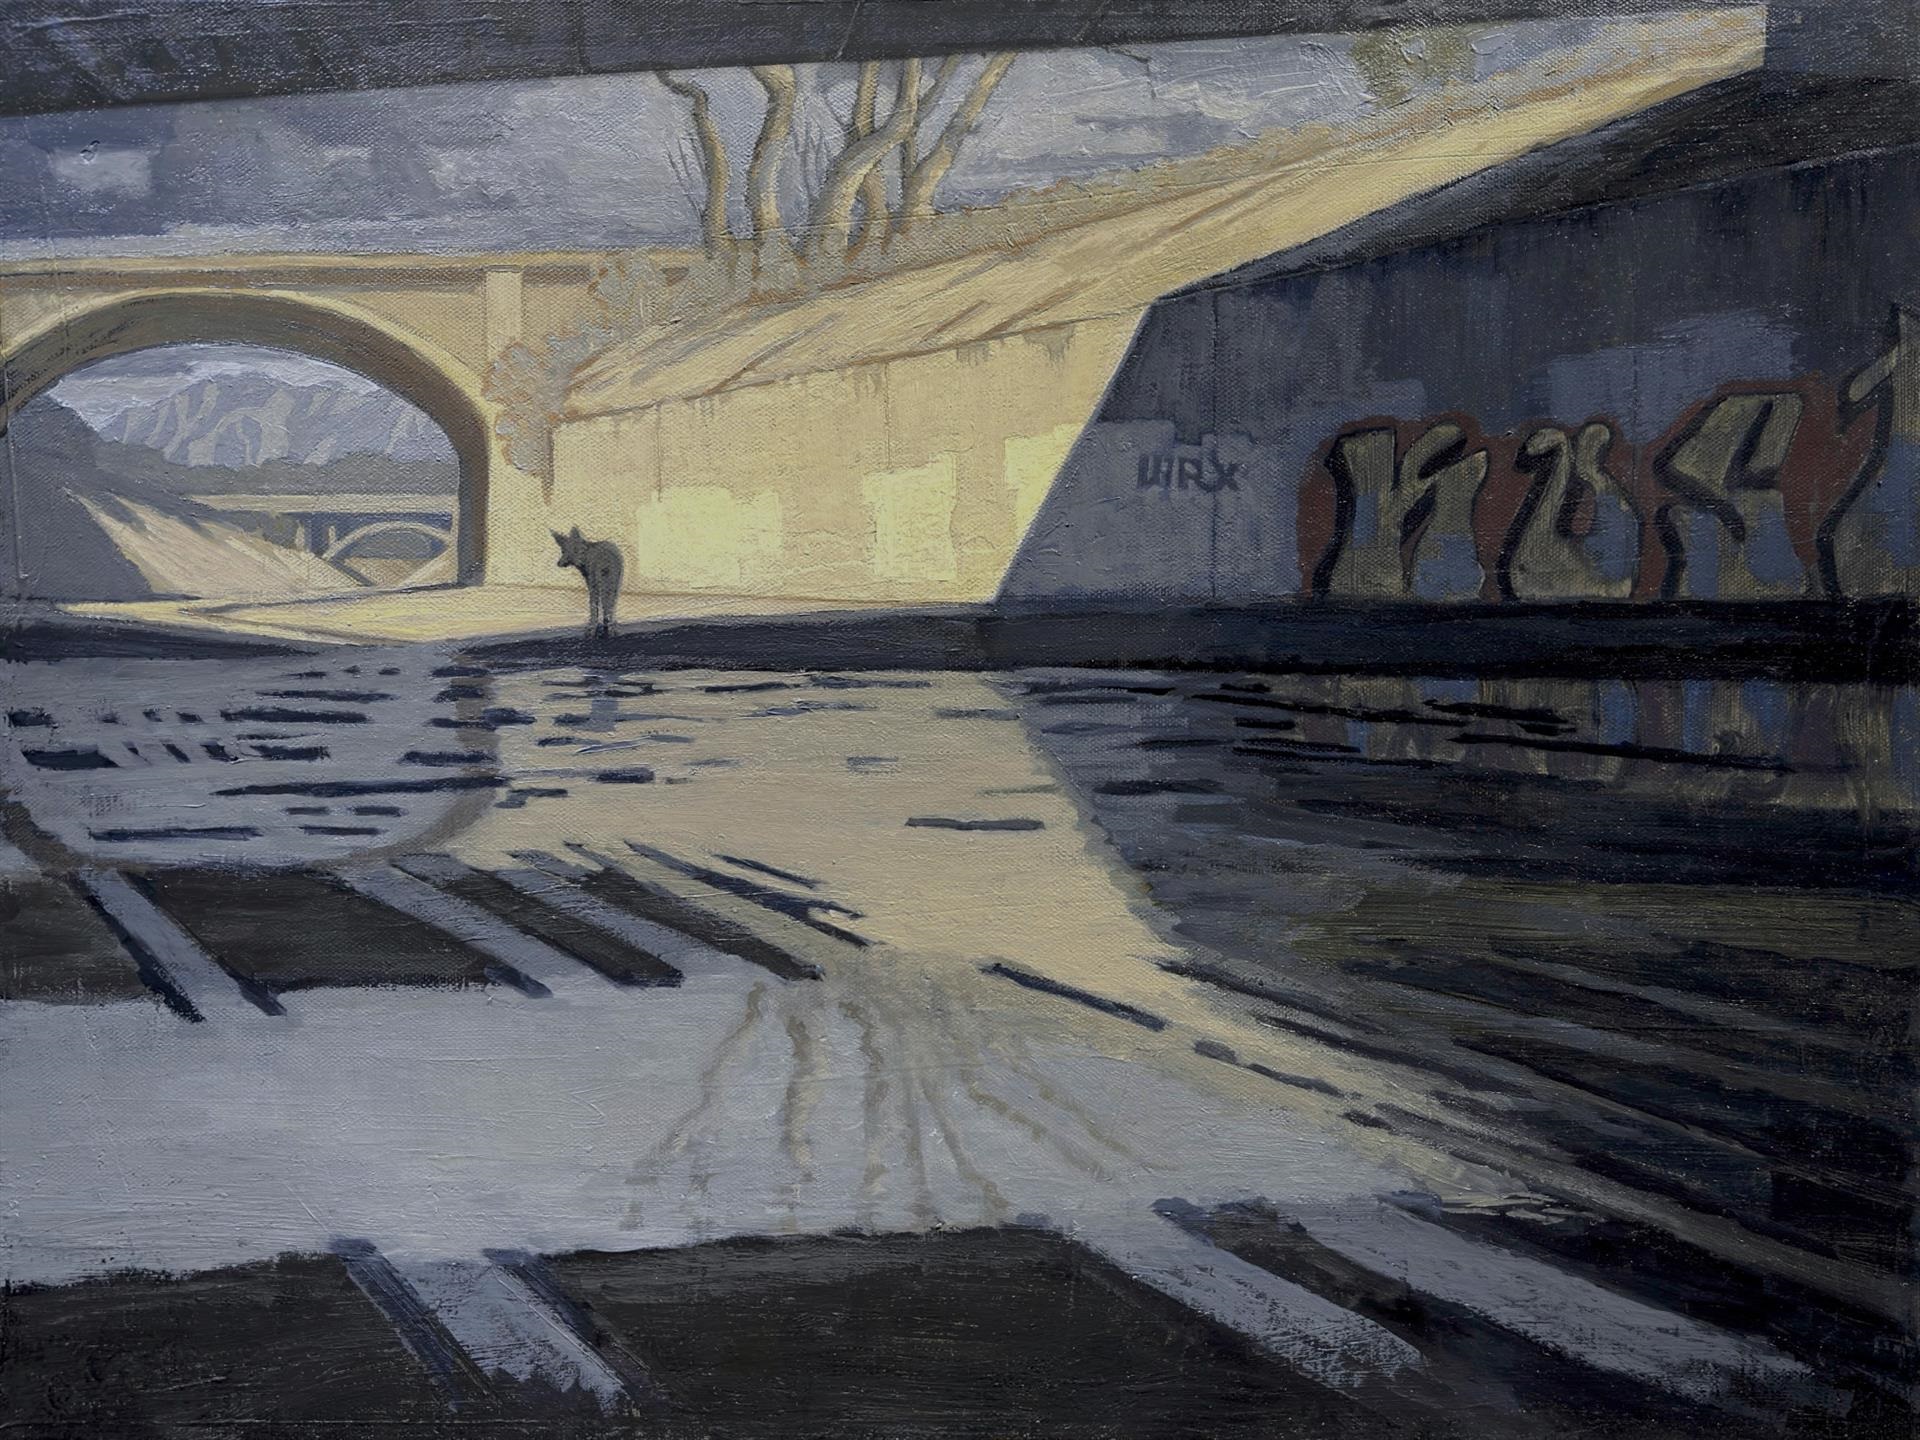 John Kosta, LA River Art Painting 82 titled “Visitors,” Oil on canvas, 18 x 24 inches, Collection of the Artist